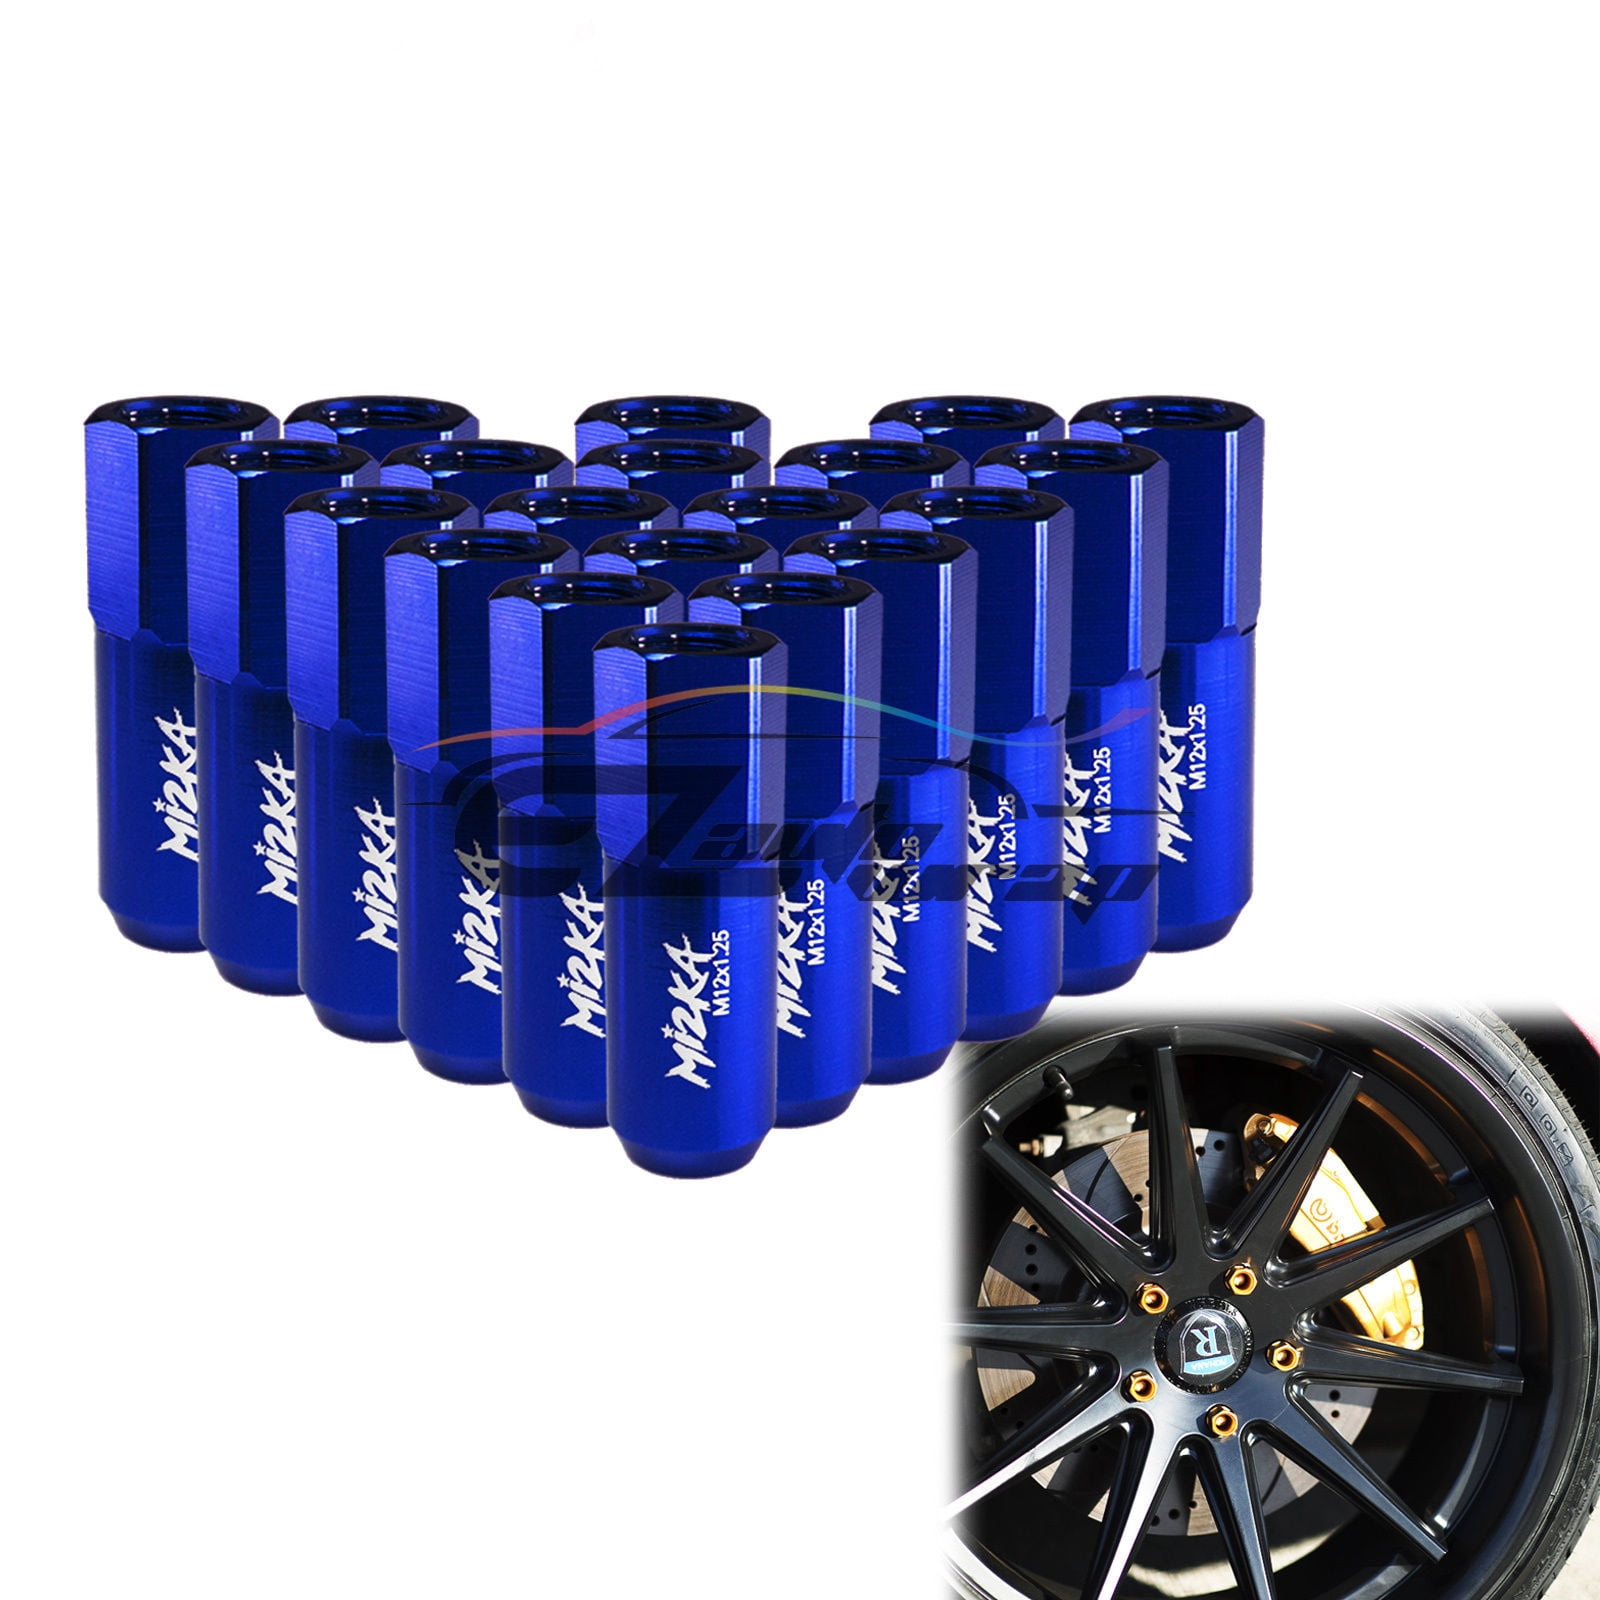 CarBole 60mm M12X1.5 Racing Wheel Spiked Lug Nuts Extended Pack of 20 Gold